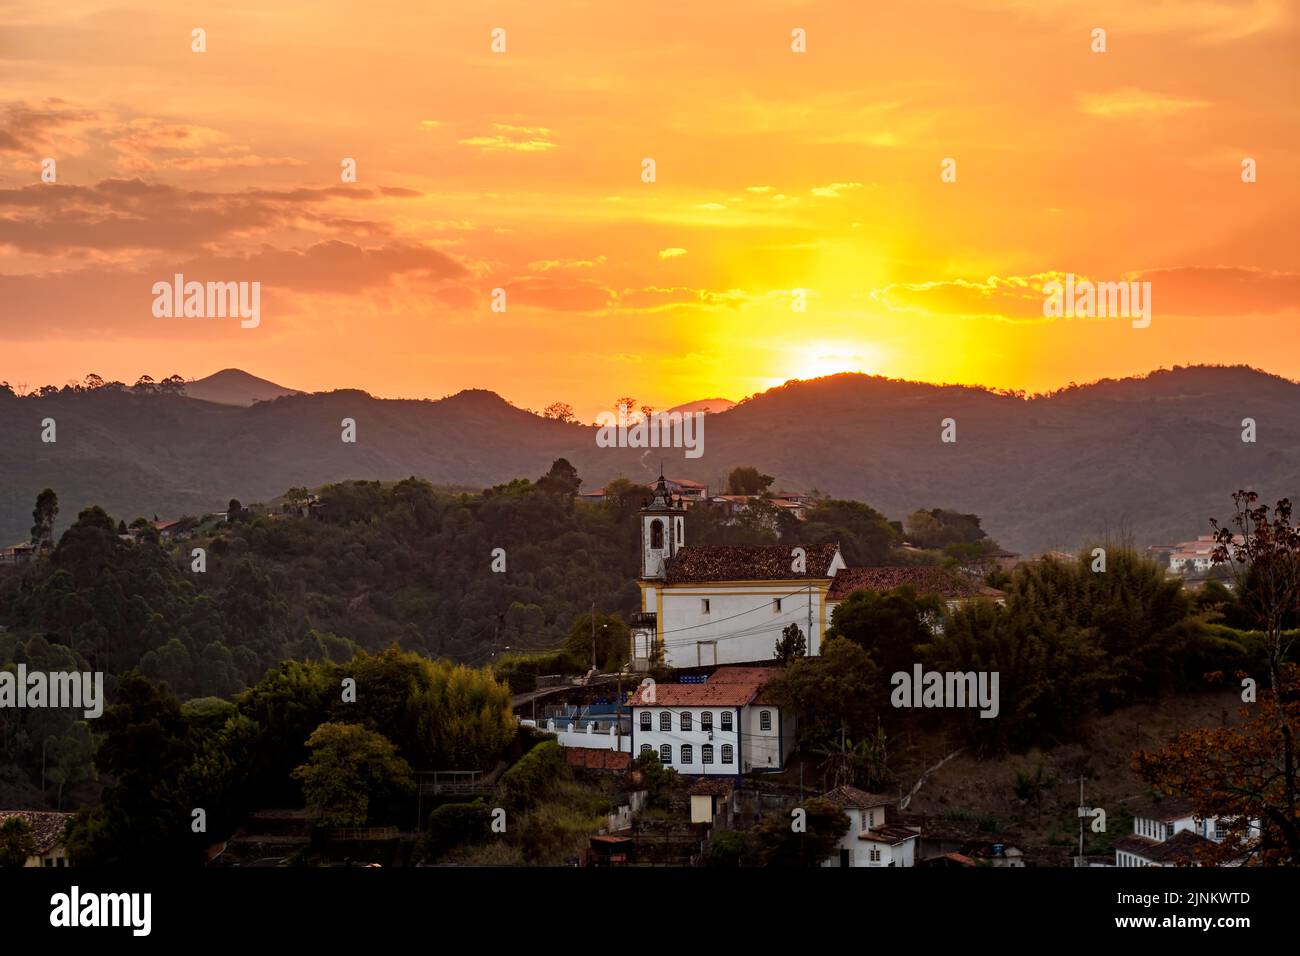 Old historic colonial church among the mountains of Ouro Preto city during sunset Stock Photo